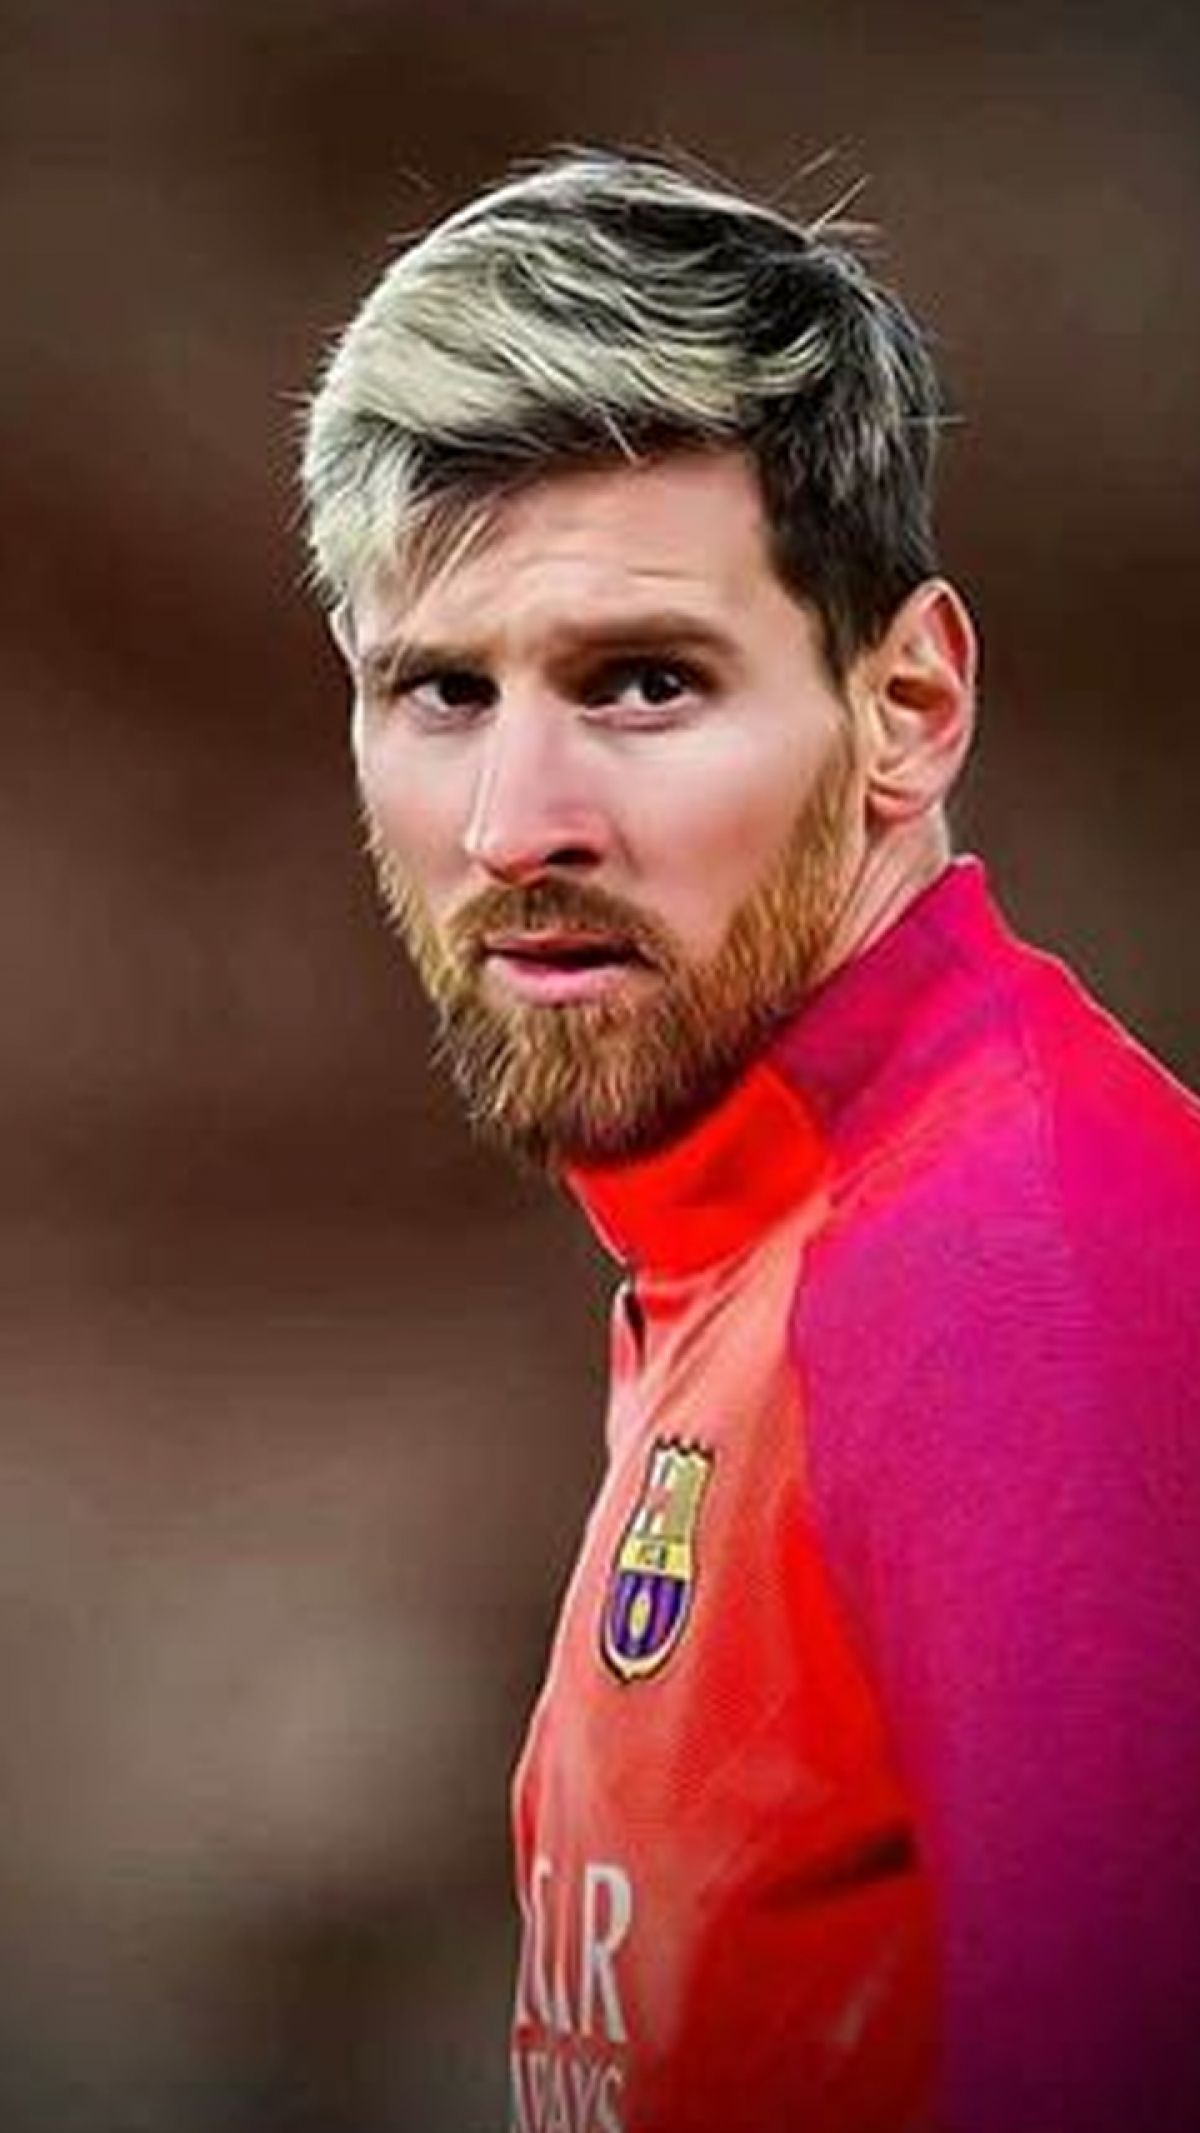 prompthunt: Close-up portrait of Lionel Messi, long silver hair with a long  beard, big nose, wearing a barca cape, katsuhiro tomo